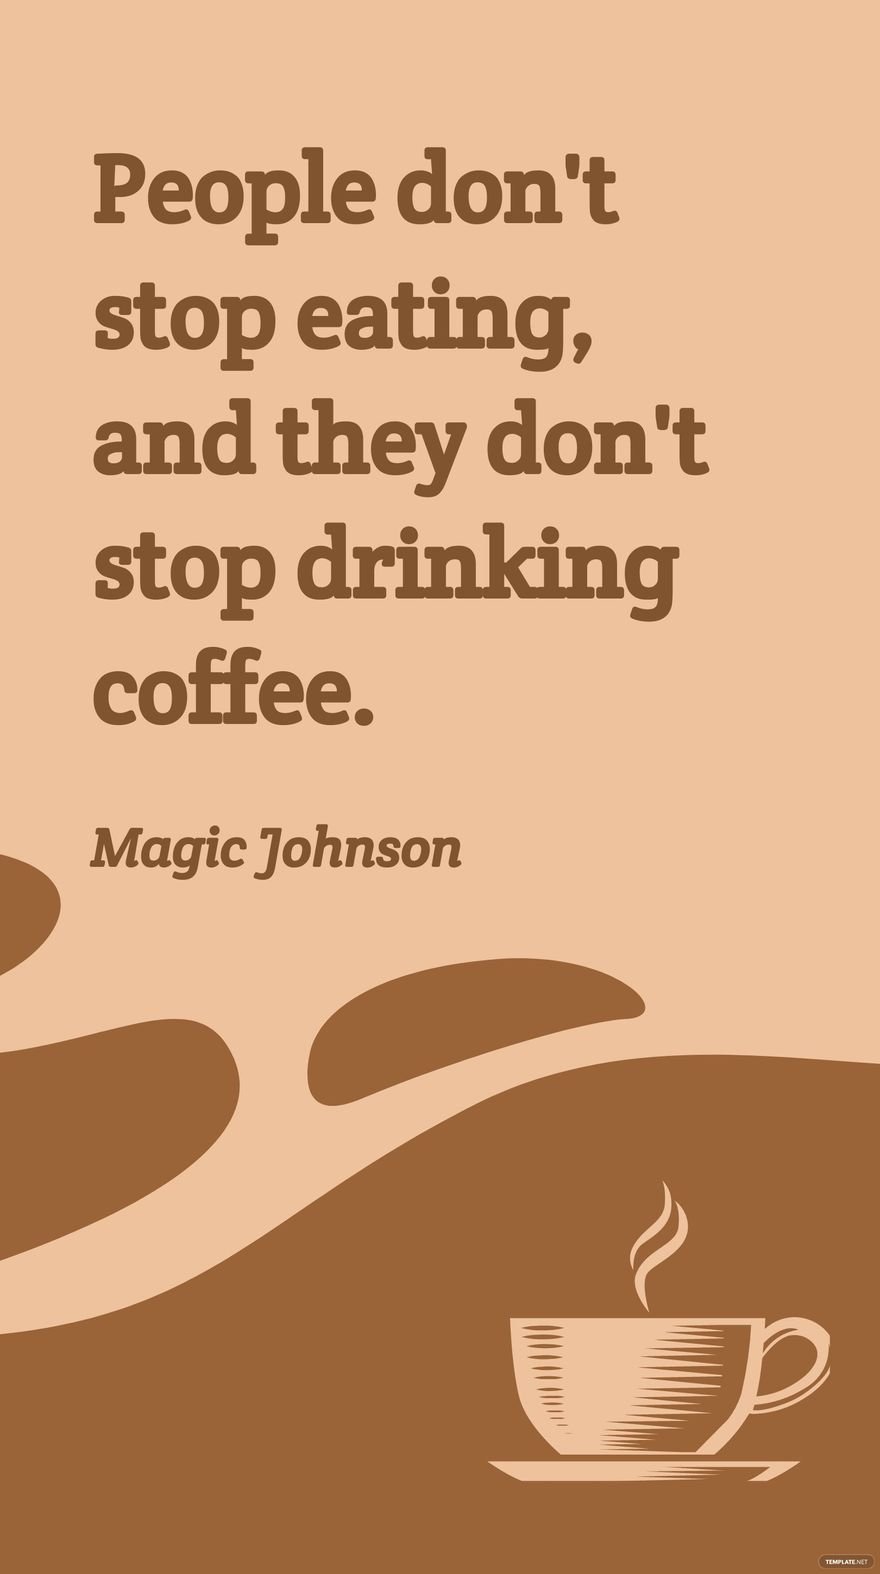 Free Magic Johnson - People don't stop eating, and they don't stop drinking coffee. in JPG